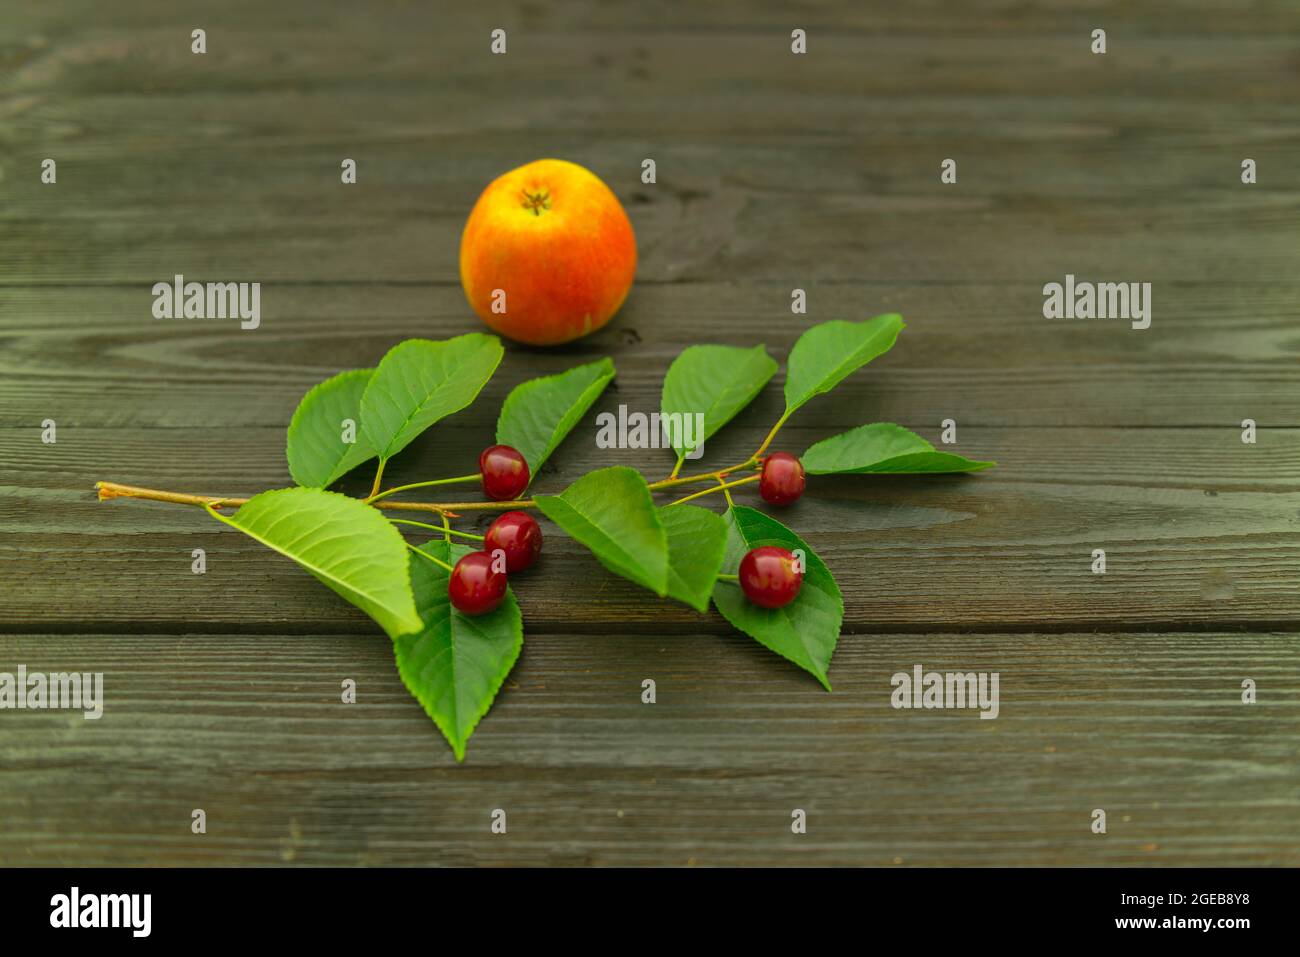 Apples placed on a black wooden substrate. Next to it, on a twig with leaves, there are cherries. Stock Photo